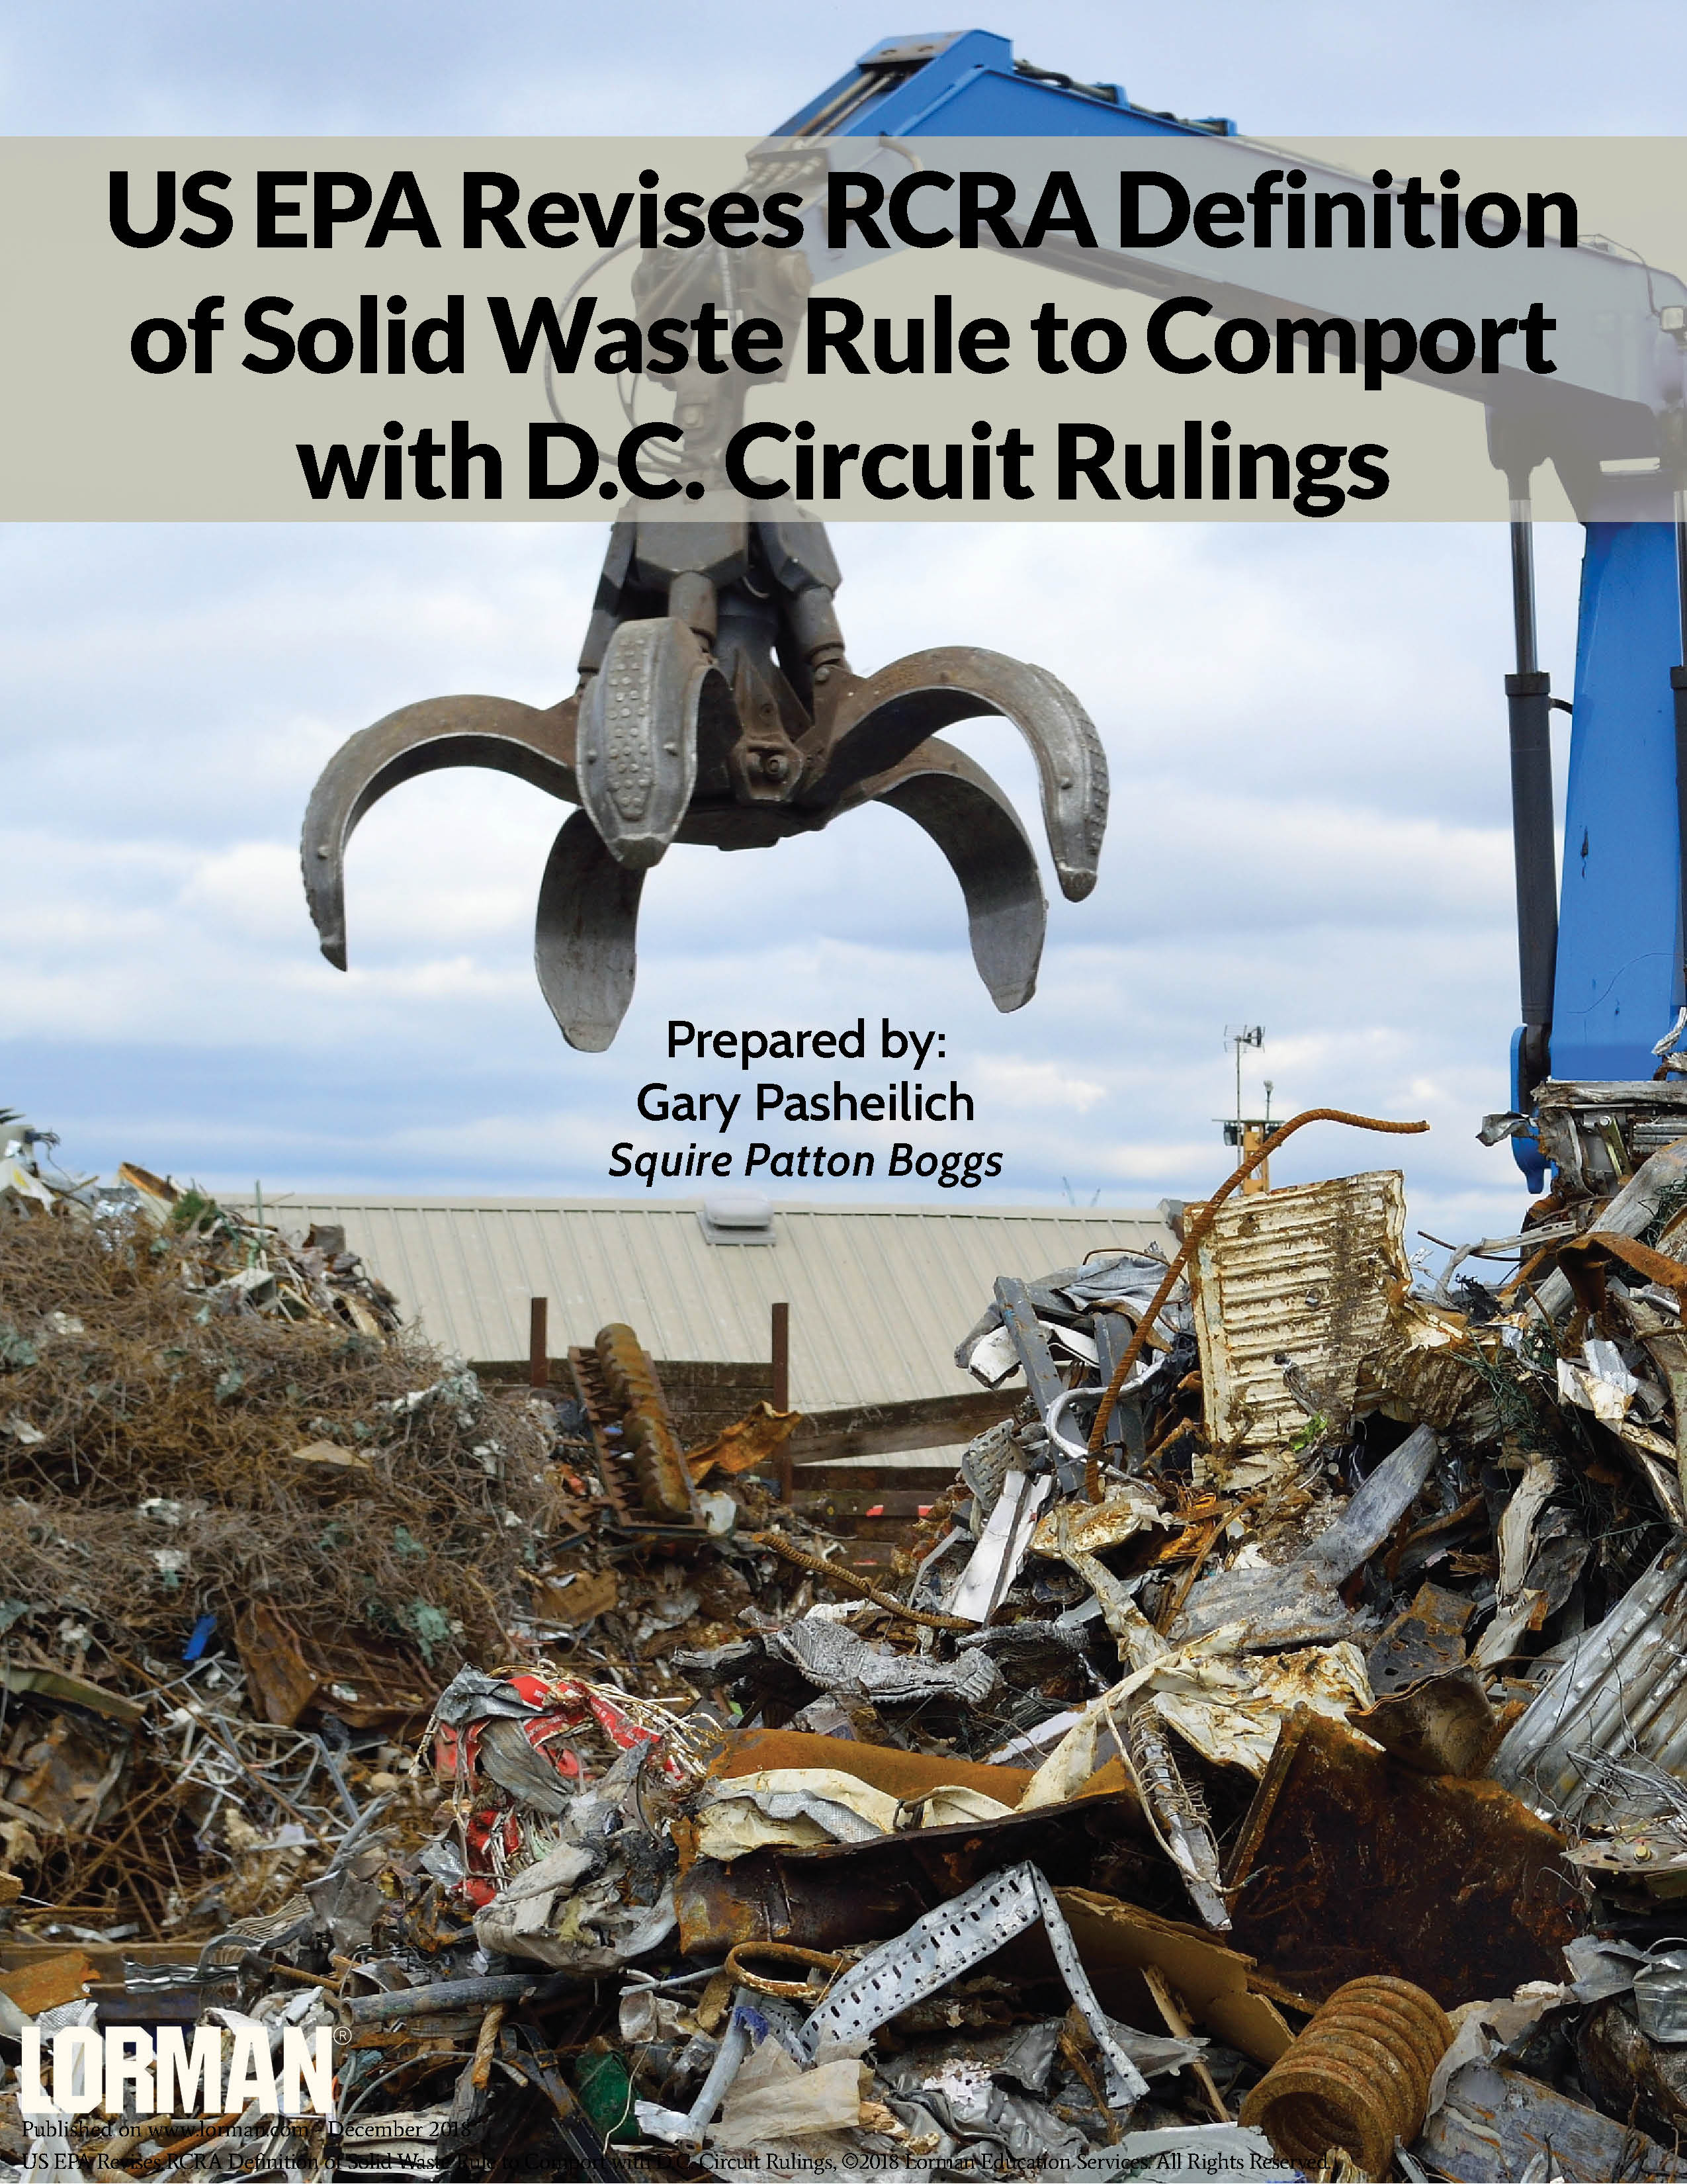 US EPA Revises RCRA Definition of Solid Waste Rule to Comport with D.C. Circuit Rulings